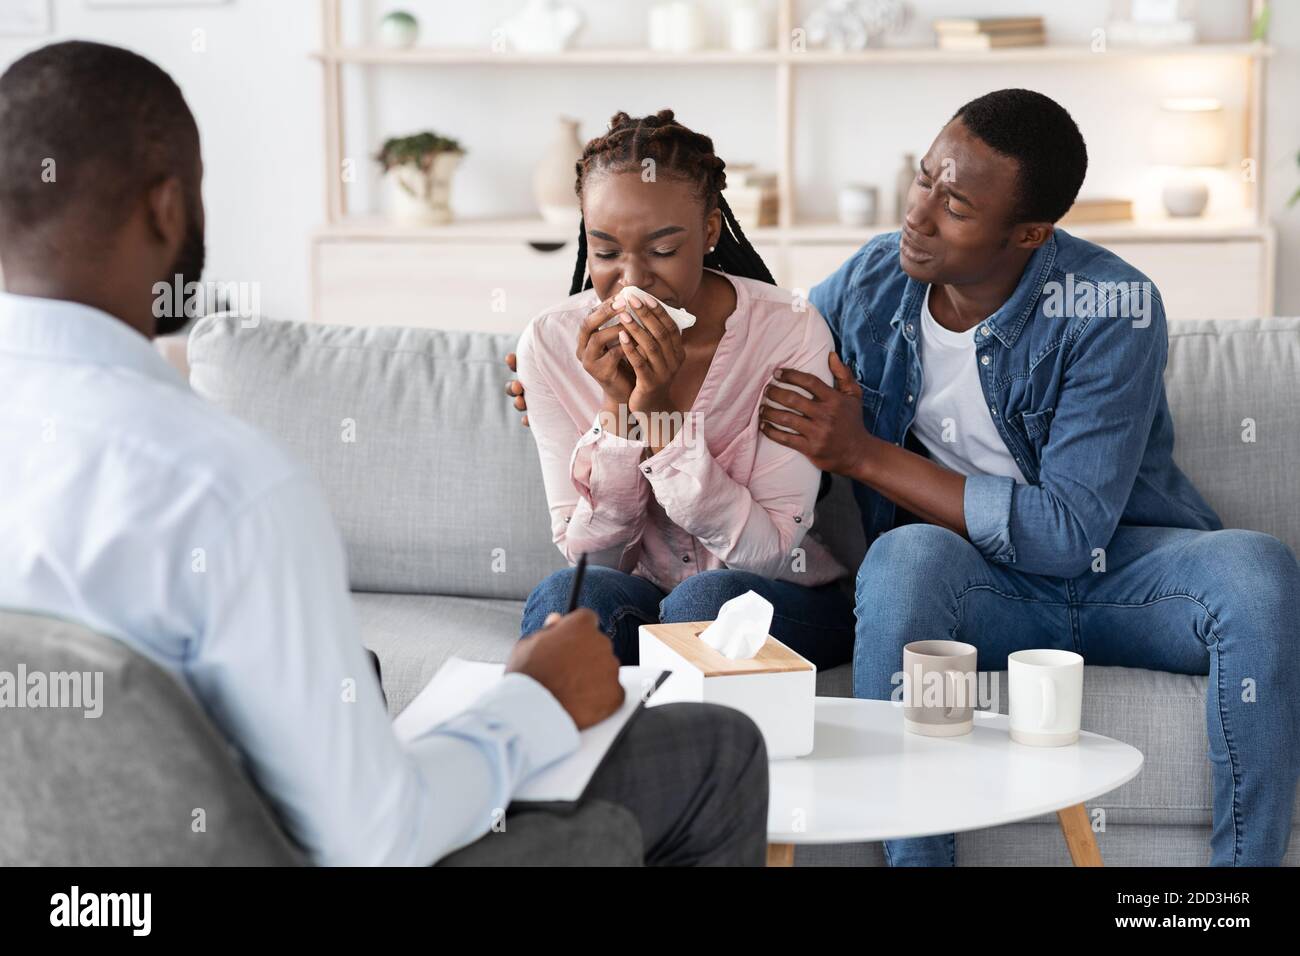 Young black woman crying at meeting with family counselor, husband comforting her Stock Photo